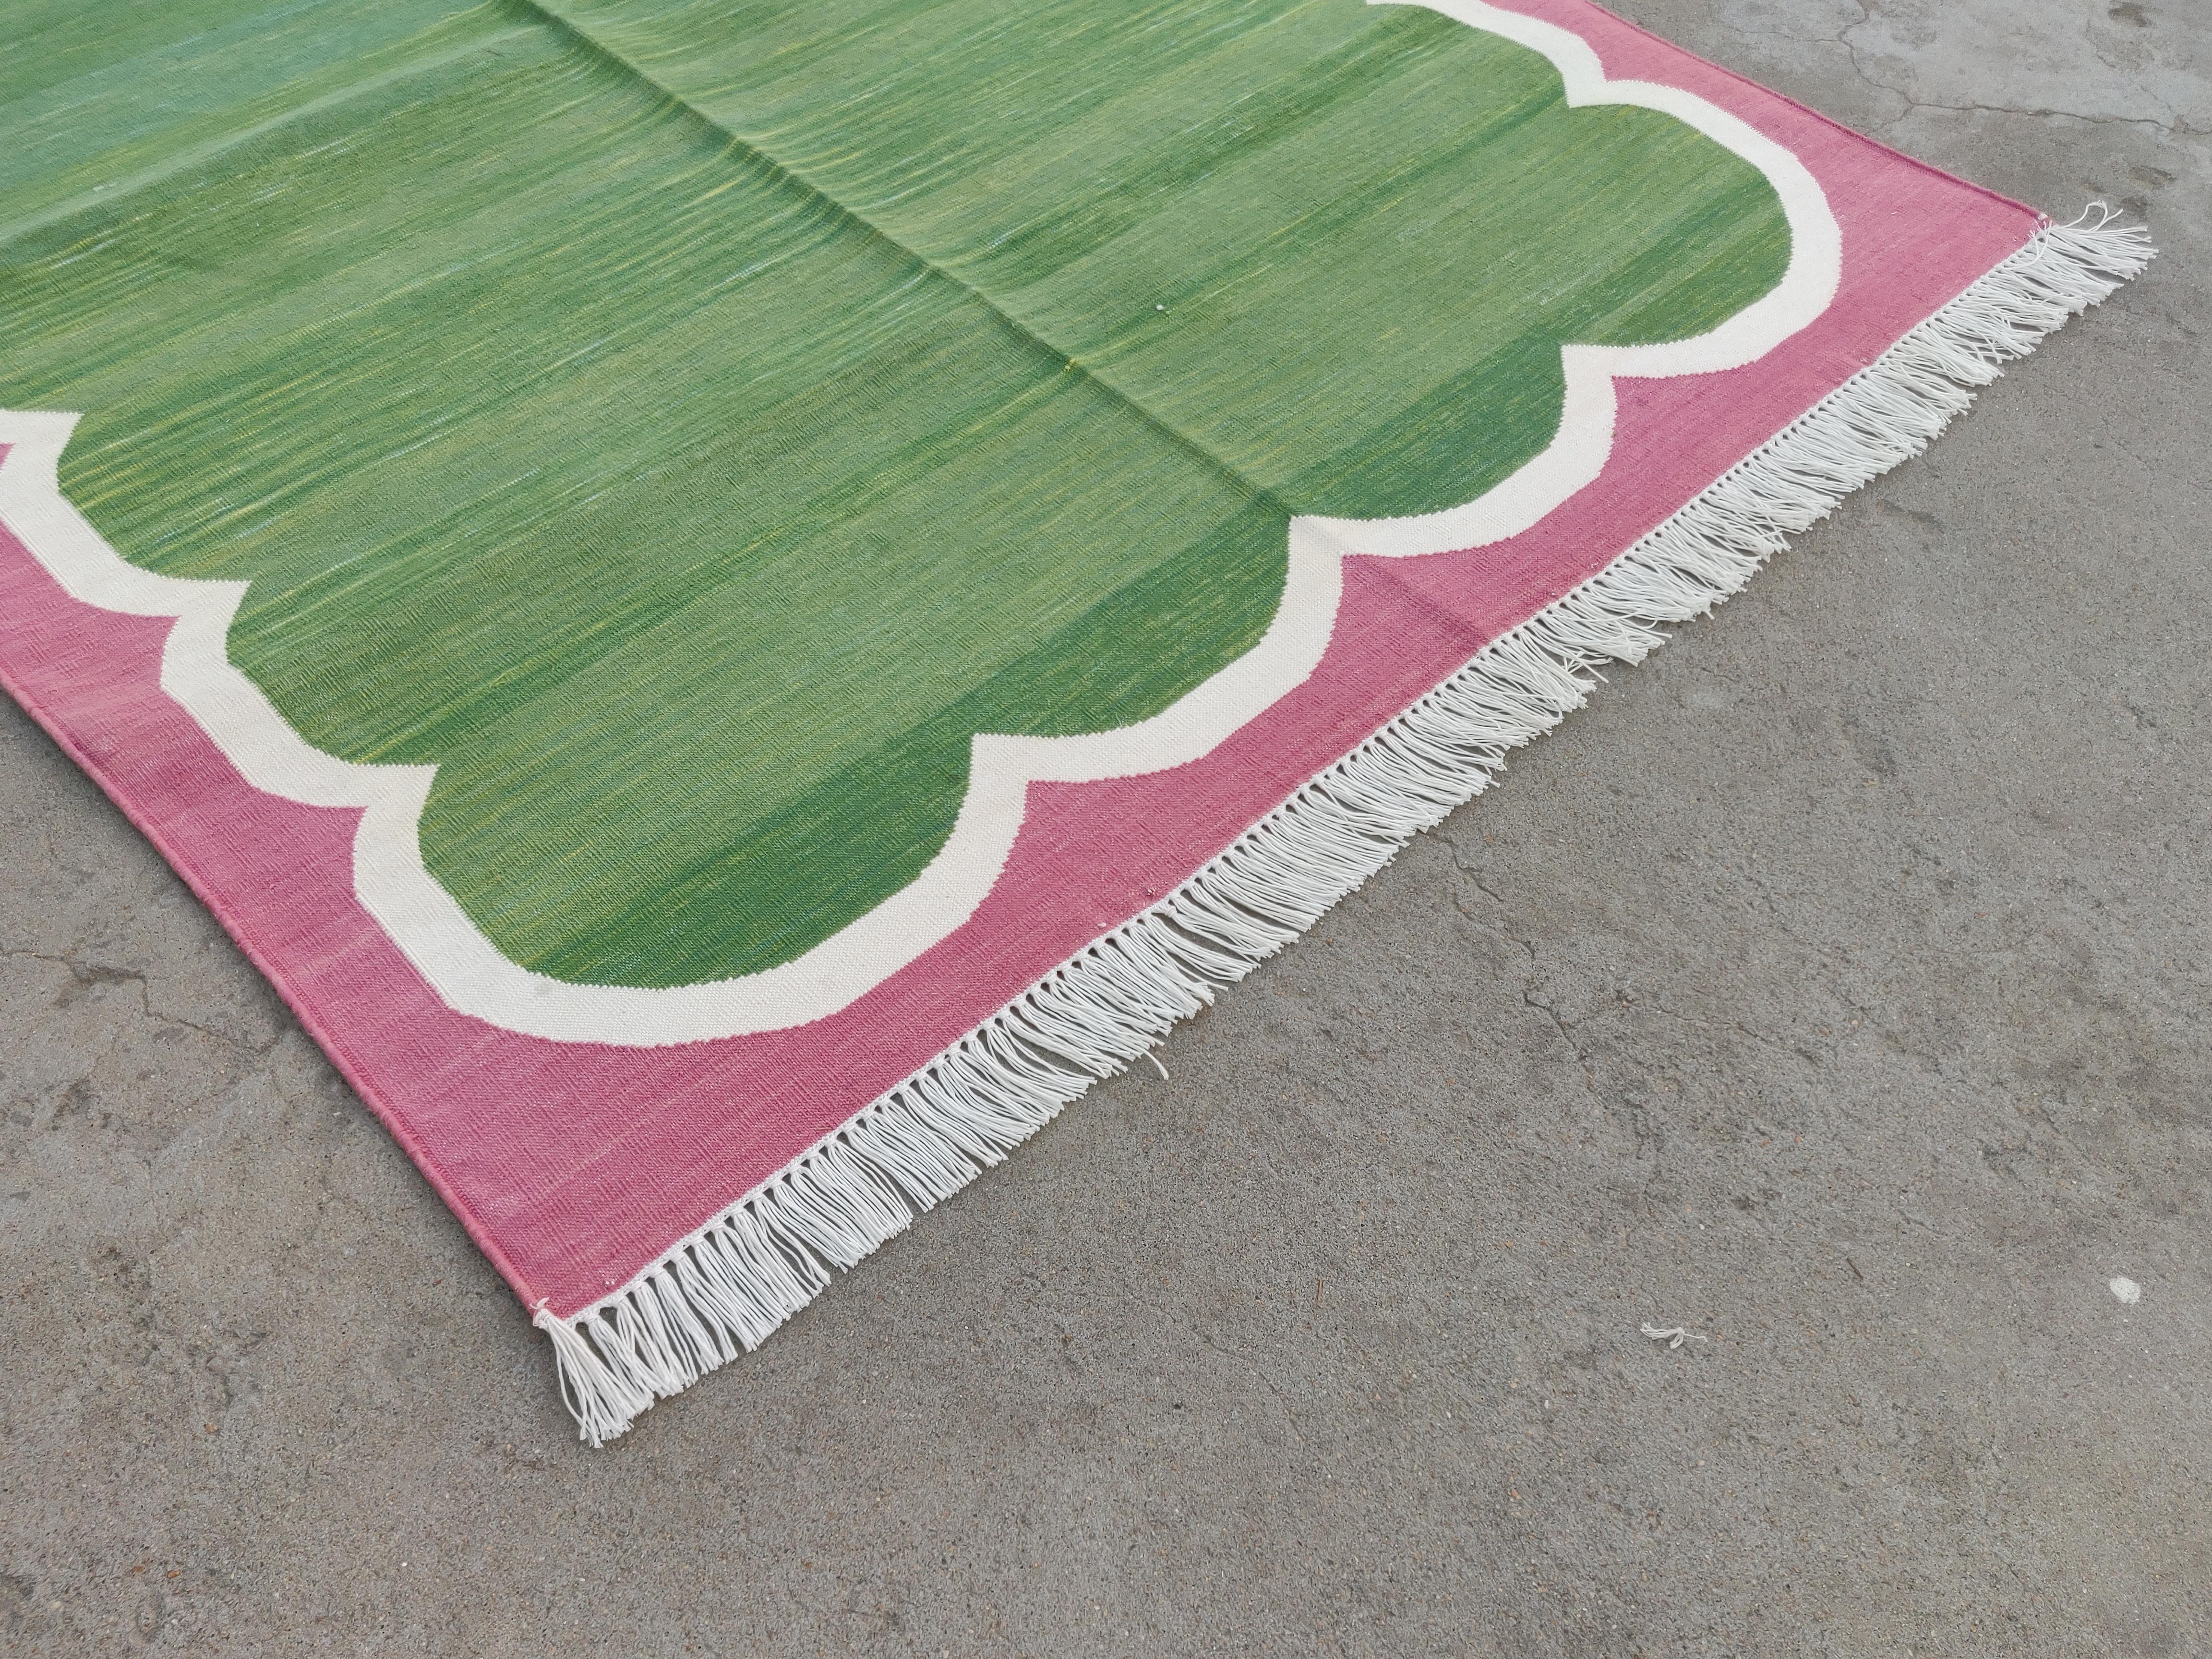 Mid-Century Modern Handmade Cotton Area Flat Weave Rug, 5x7 Green And Pink Scallop Striped Dhurrie For Sale